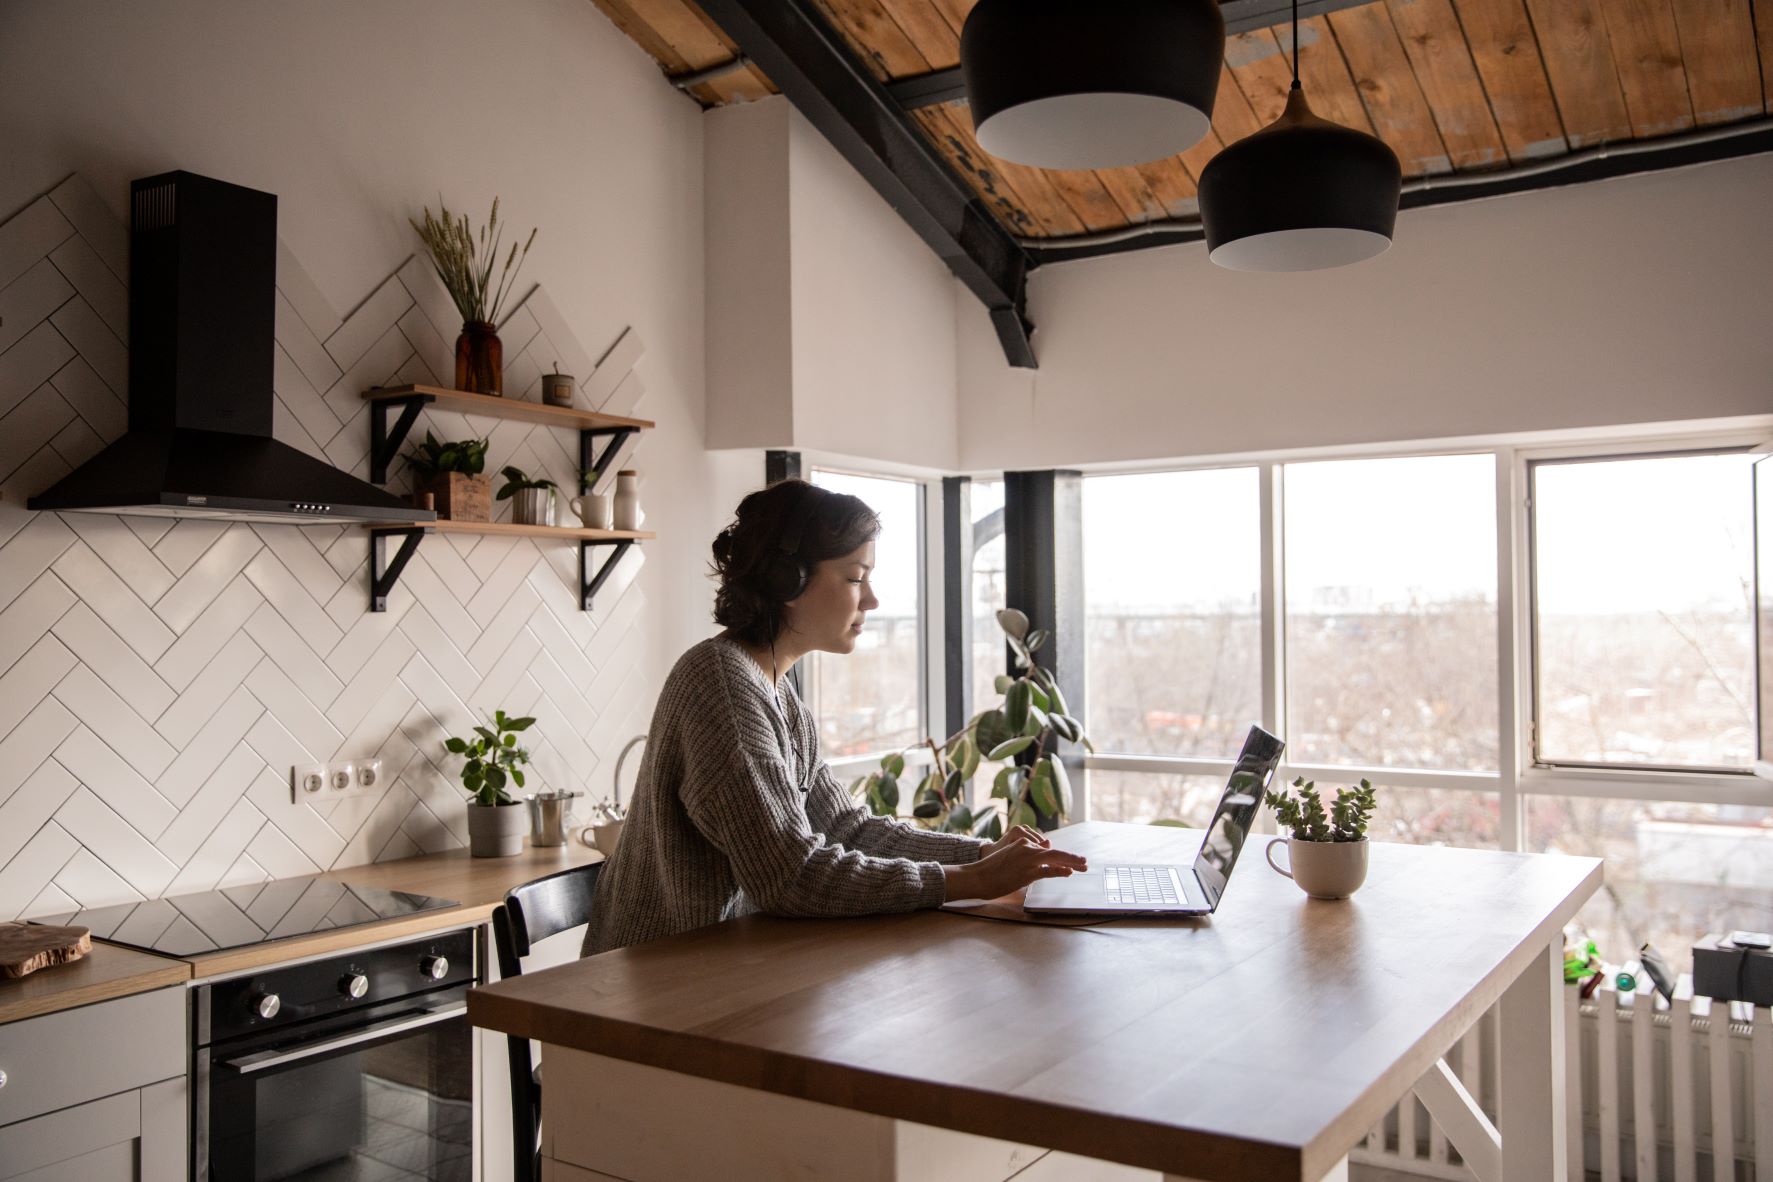 A remote working work from home in their rustic kitchen.